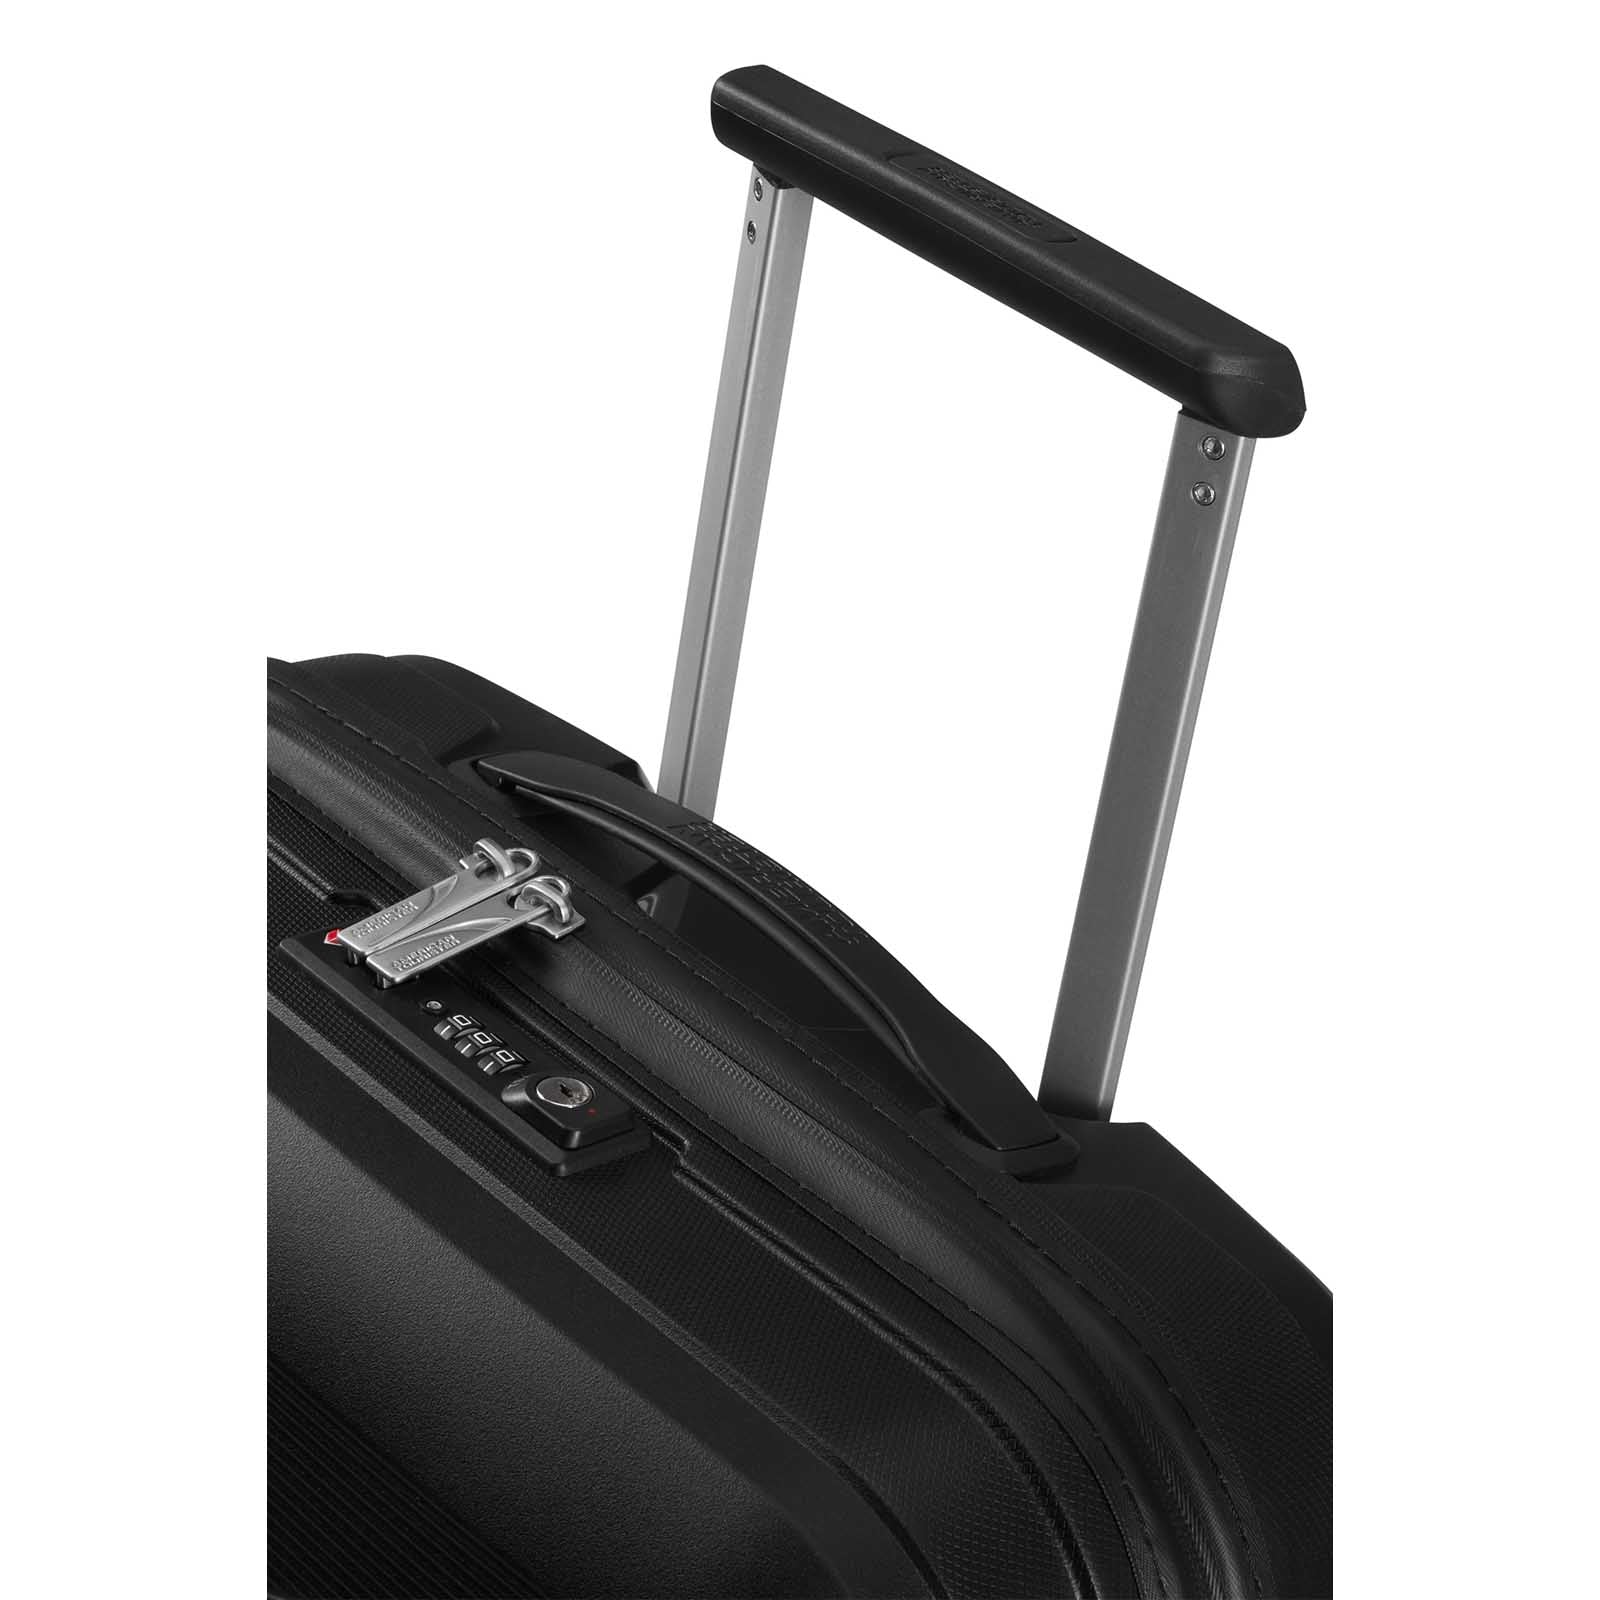 American-Tourister-Airconic-55cm-Carry-On-Suitcase-Onyx-Black-Trolley